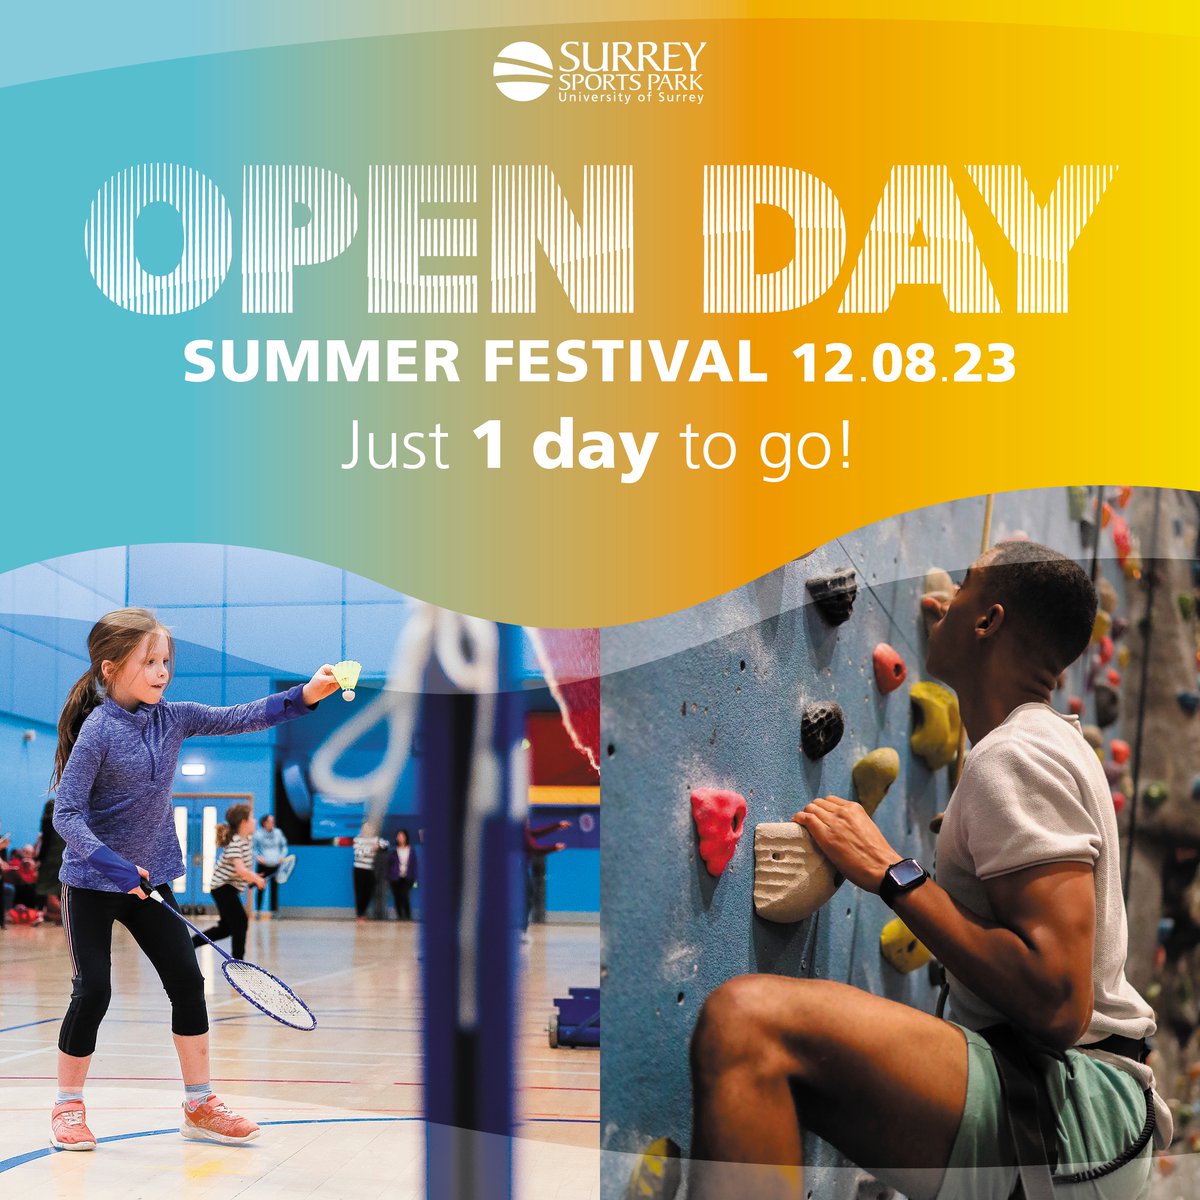 Looking for something fun to get involved with tomorrow? Tomorrow we are give you free access to all our facilities, including our festival zone with inflatables, garden games and food vendors! 🎾🏸🏐 Check out our timetable here bit.ly/3DL2I5E